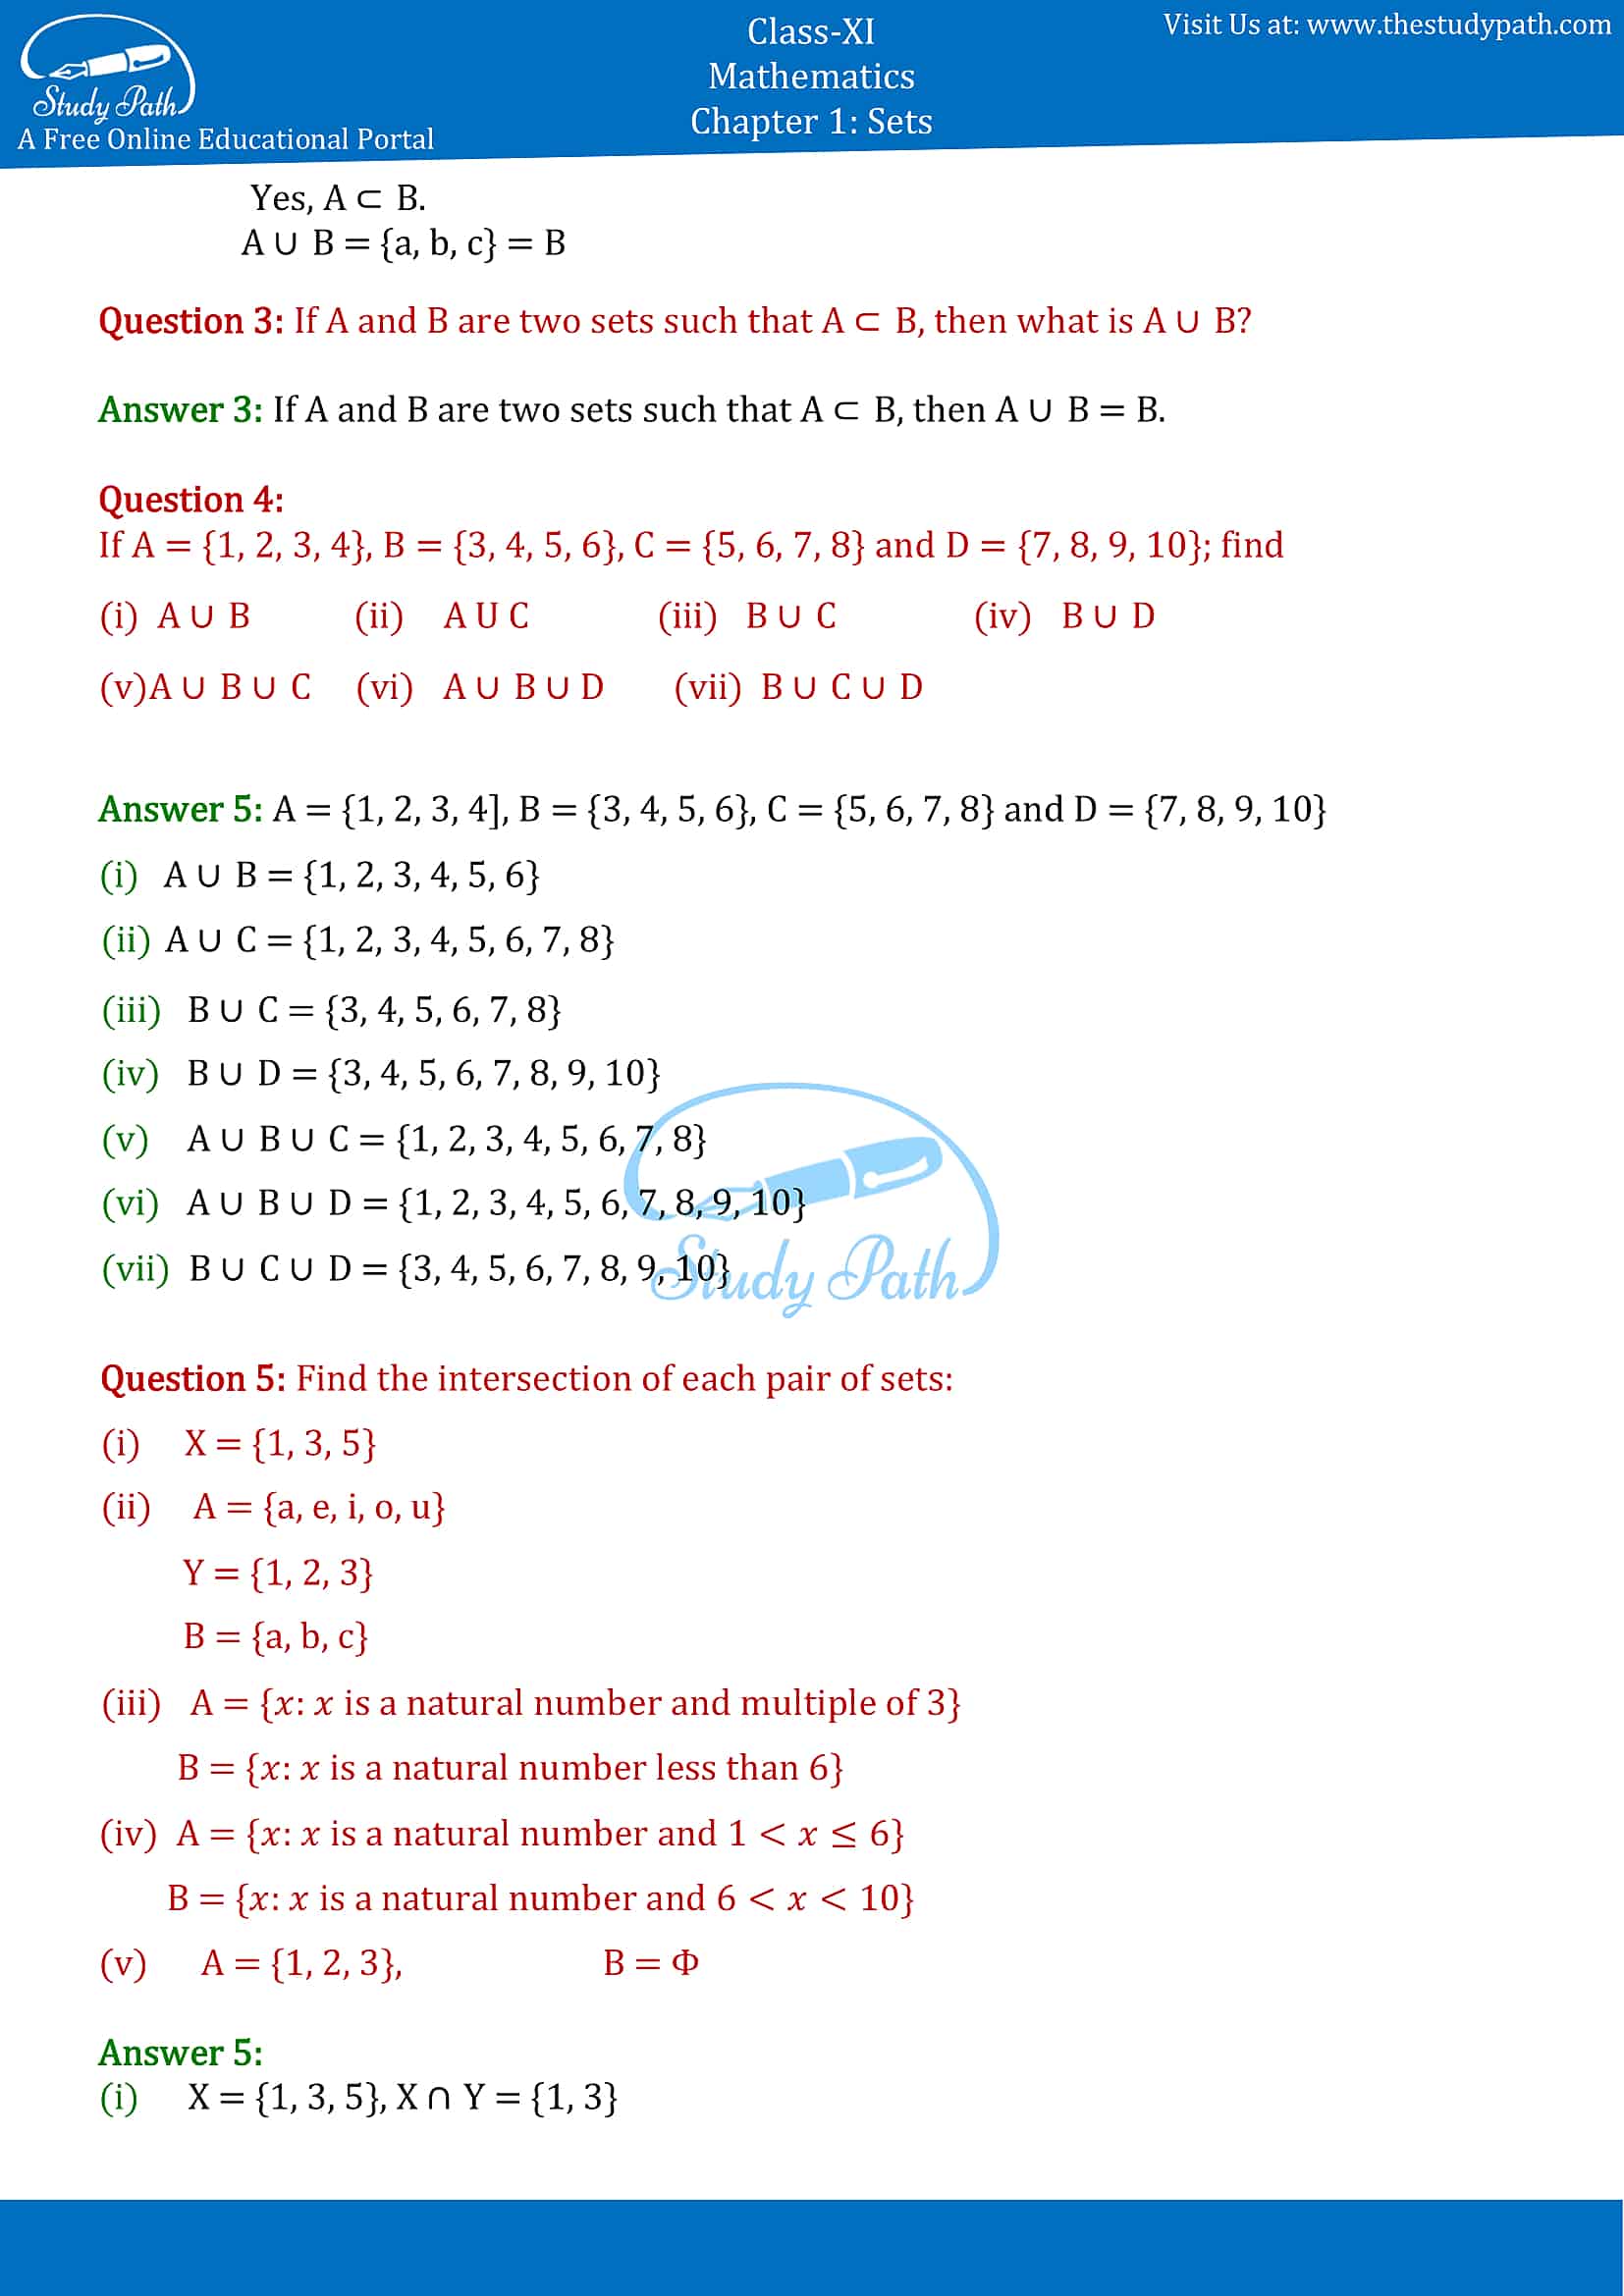 NCERT Solutions for Class 11 Maths chapter 1 sets Exercise 1.4